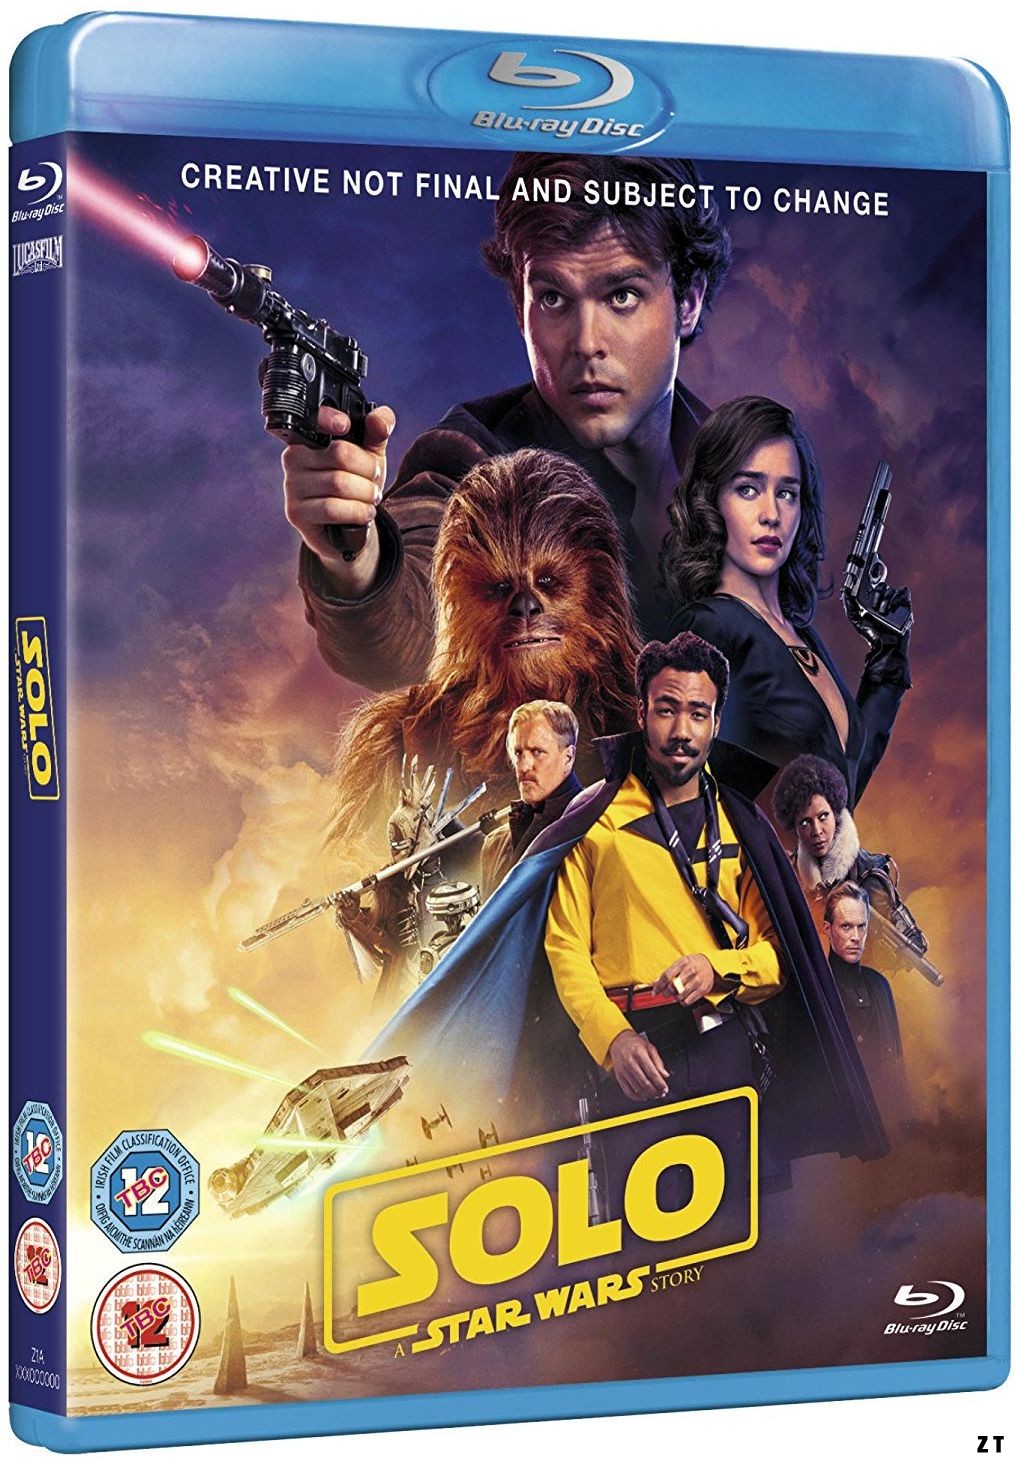 Solo: A Star Wars Story Blu-Ray 720p French